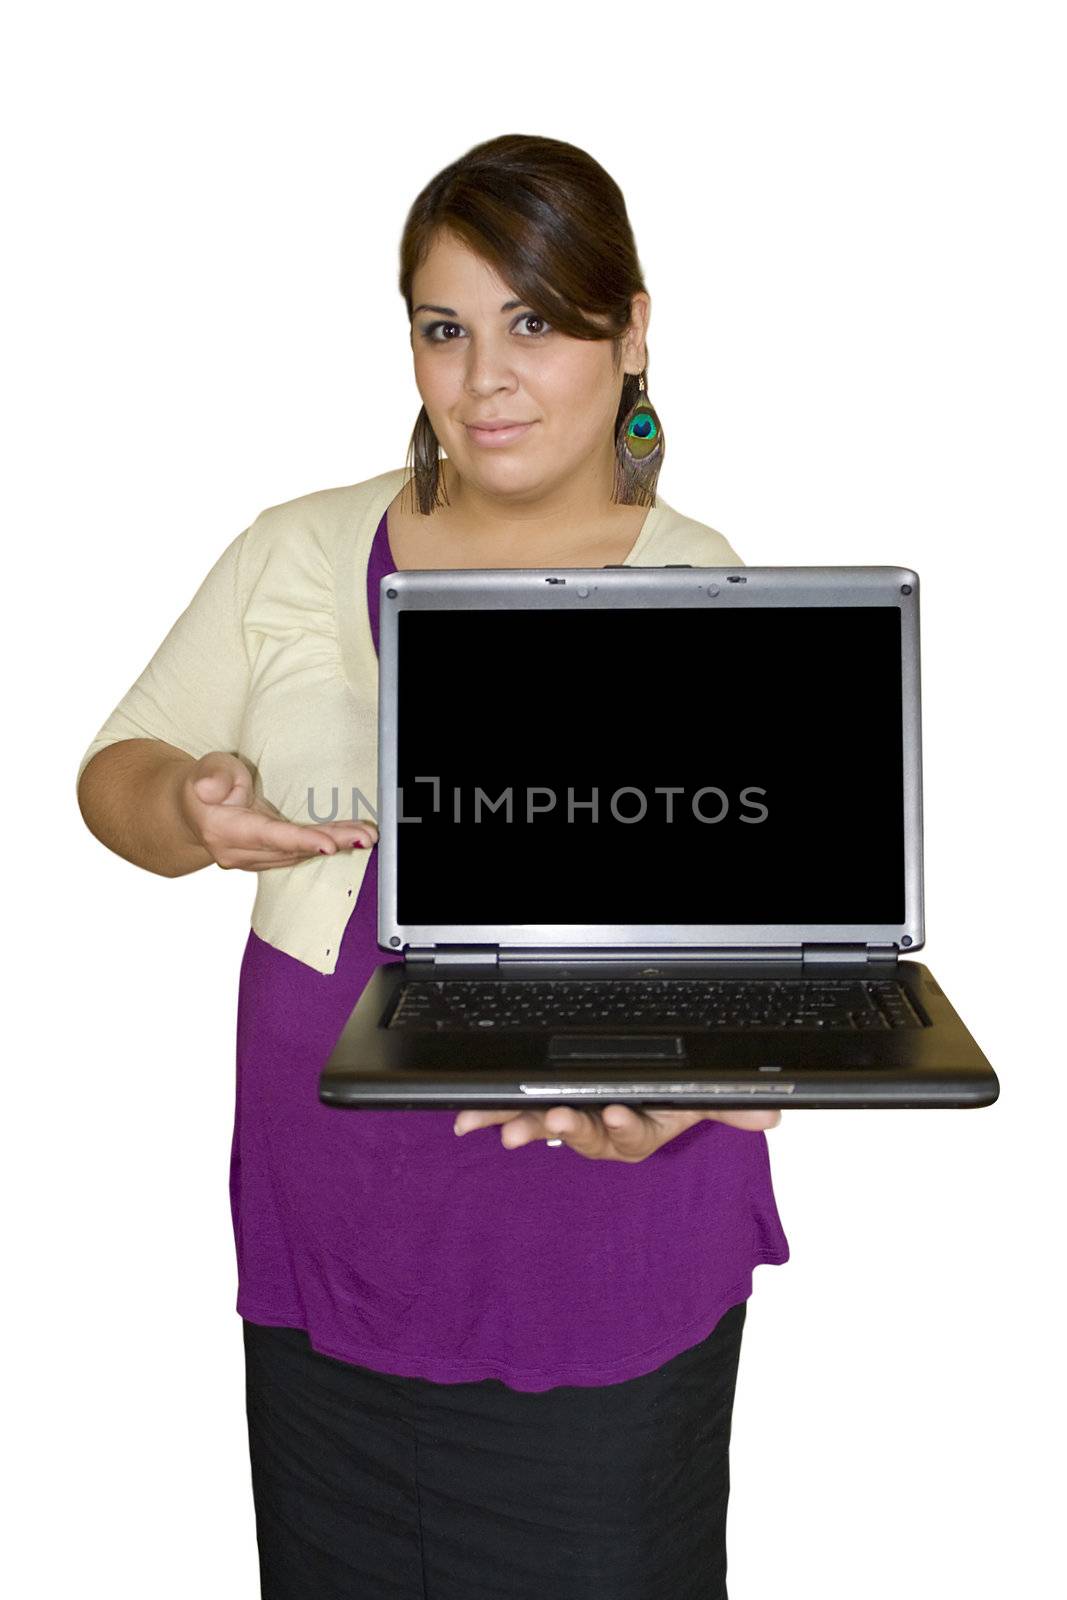 A plus size model presenting something on a laptop. Clipping paths are included for the girl as well as the screen to insert your own image.